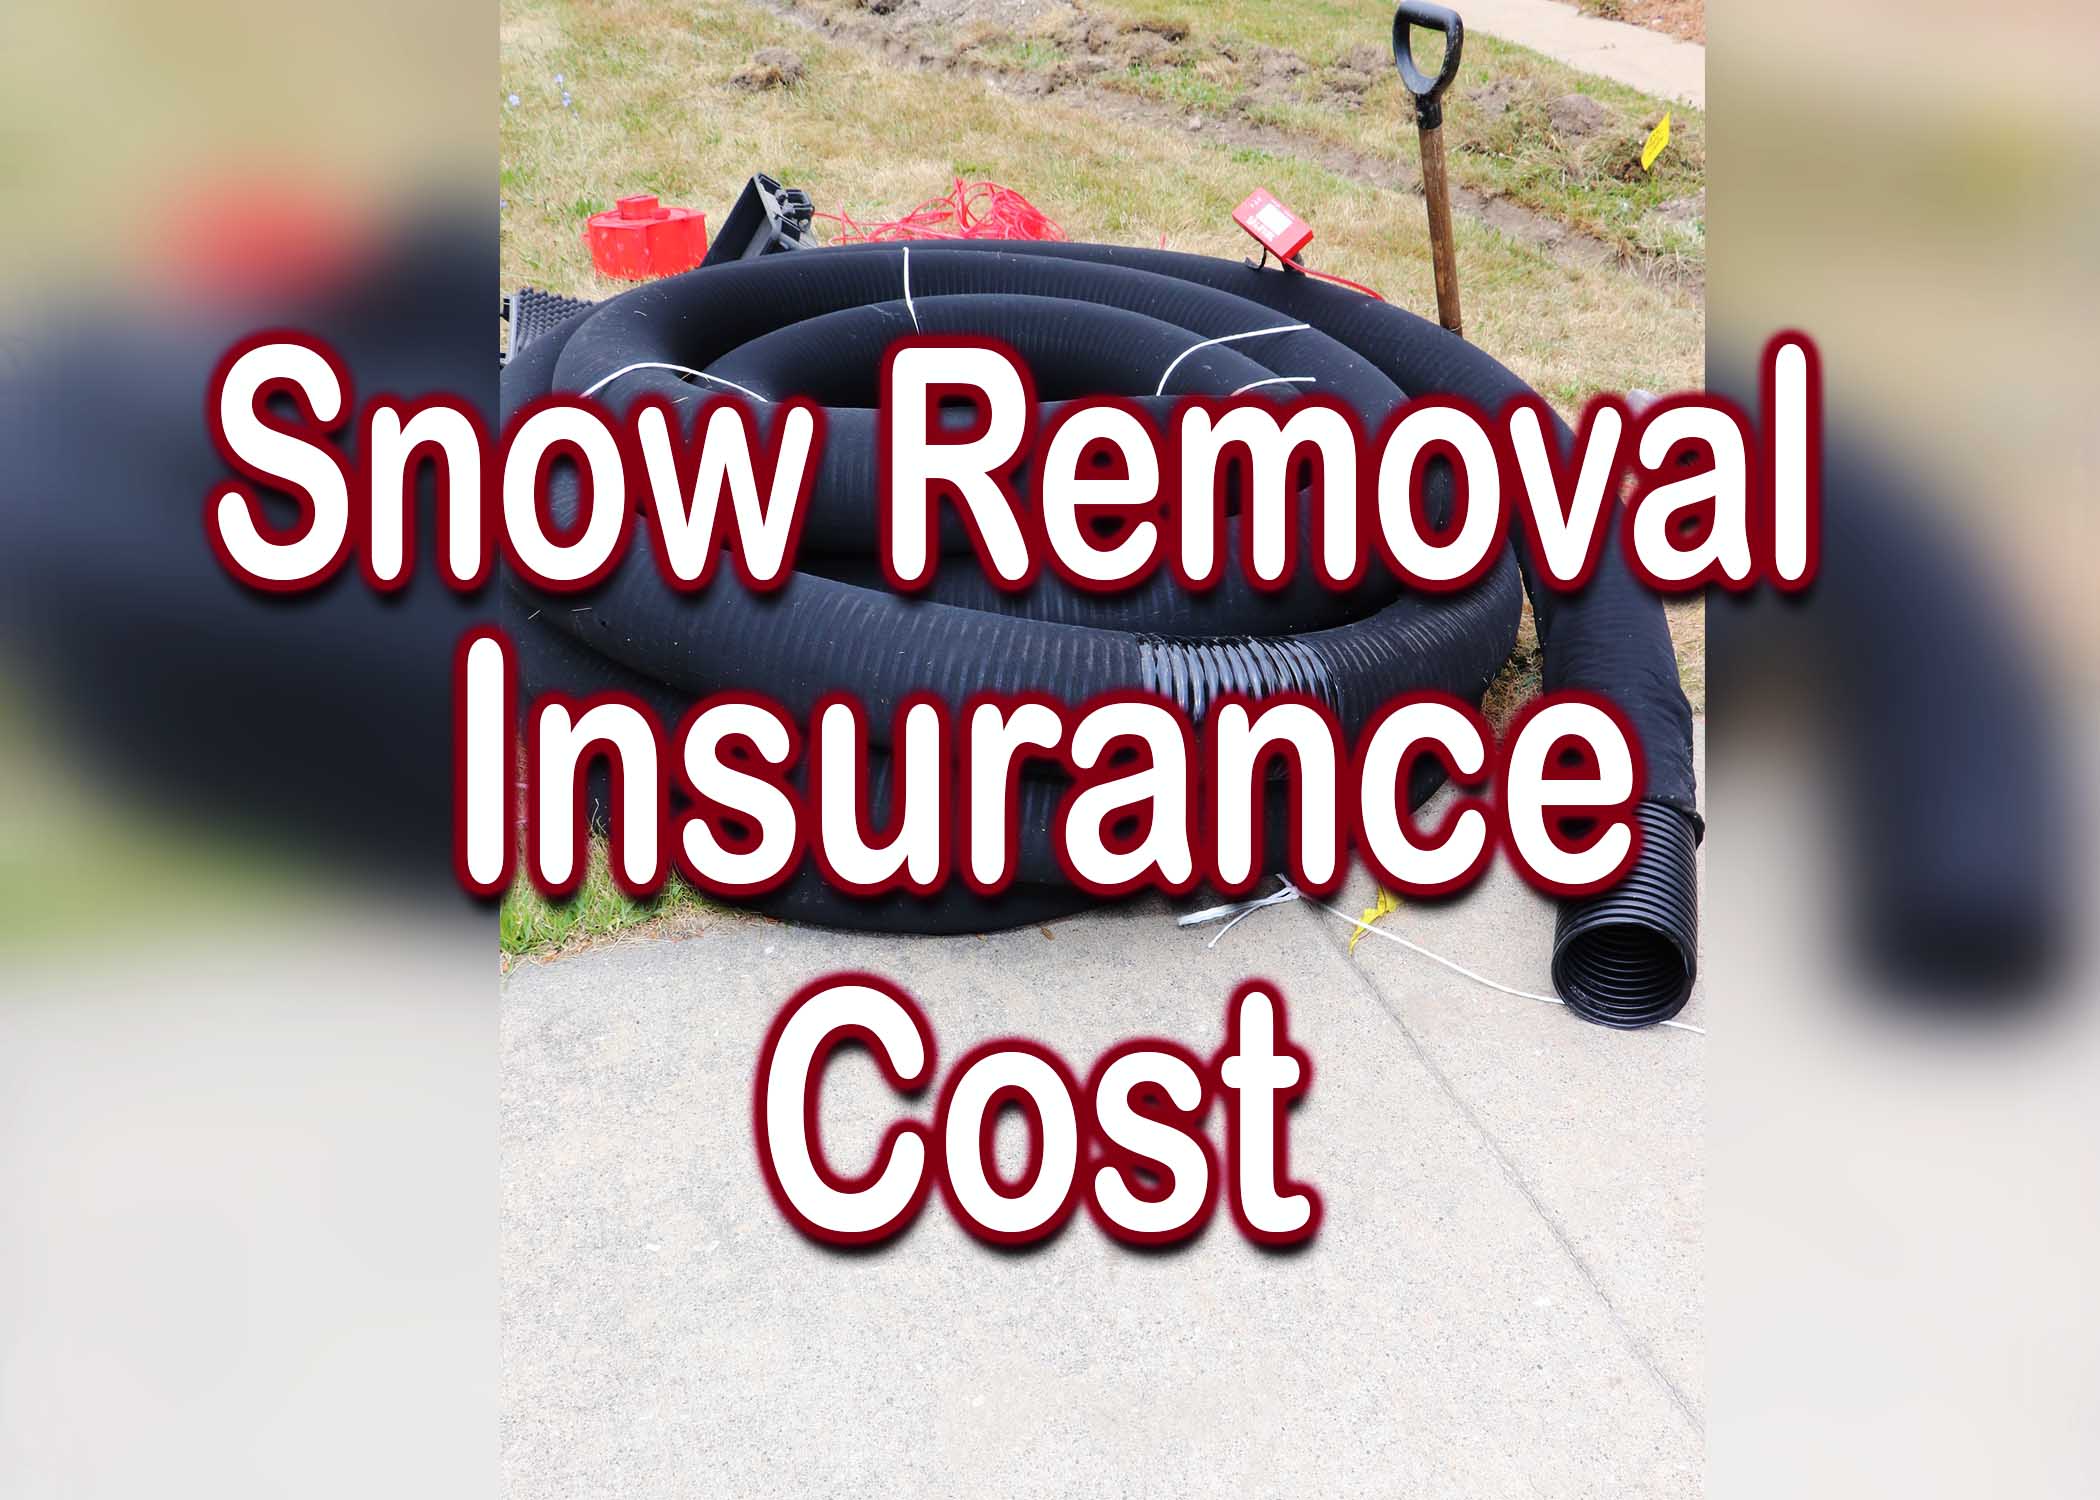 Get Updated With Snow Removal Insurance Cost